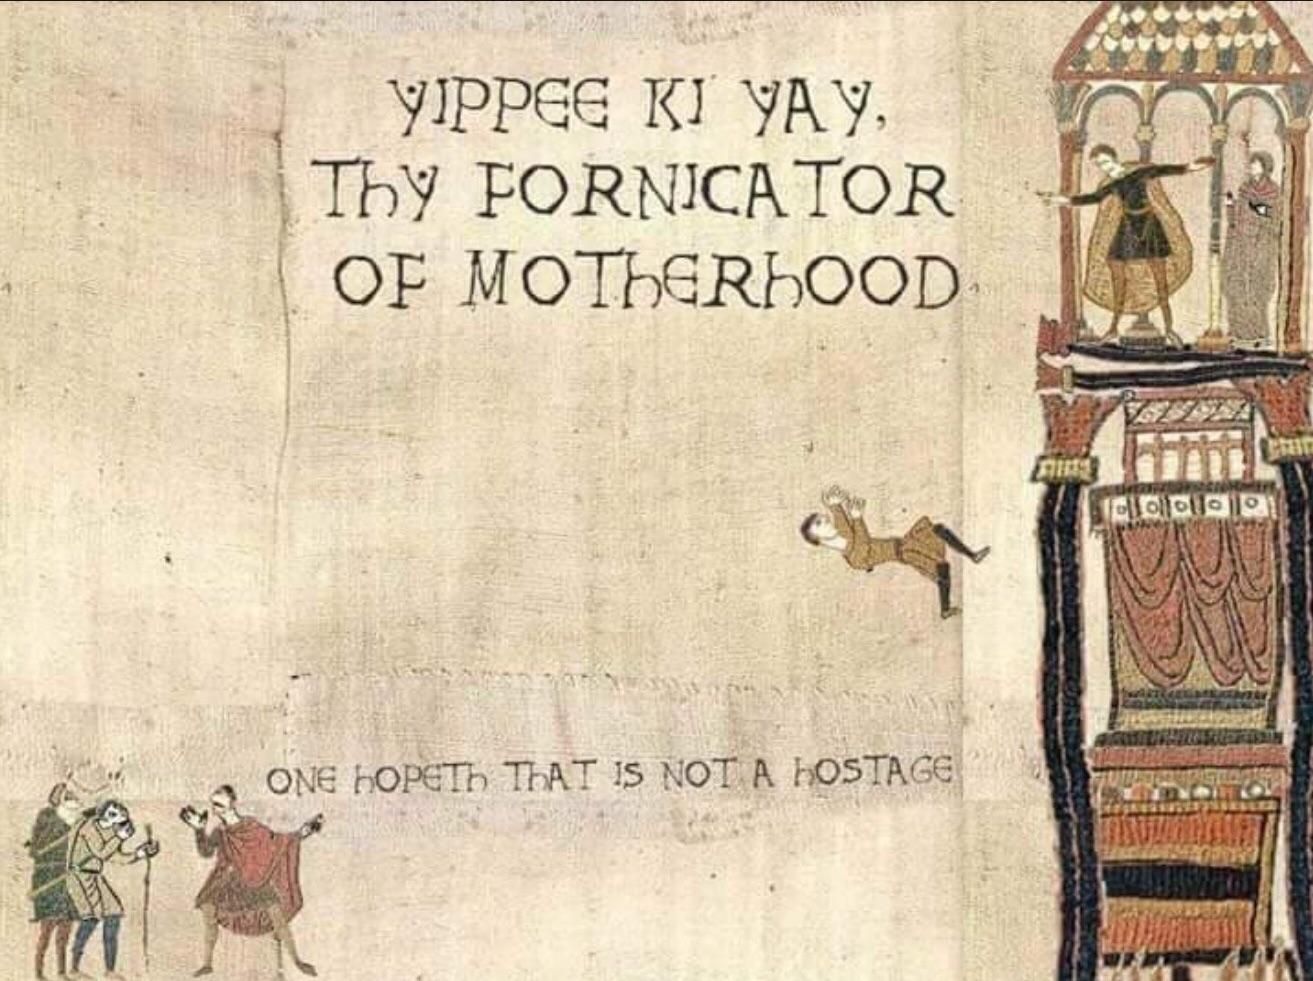 Found in an English holiday tapestry from the Middle Ages